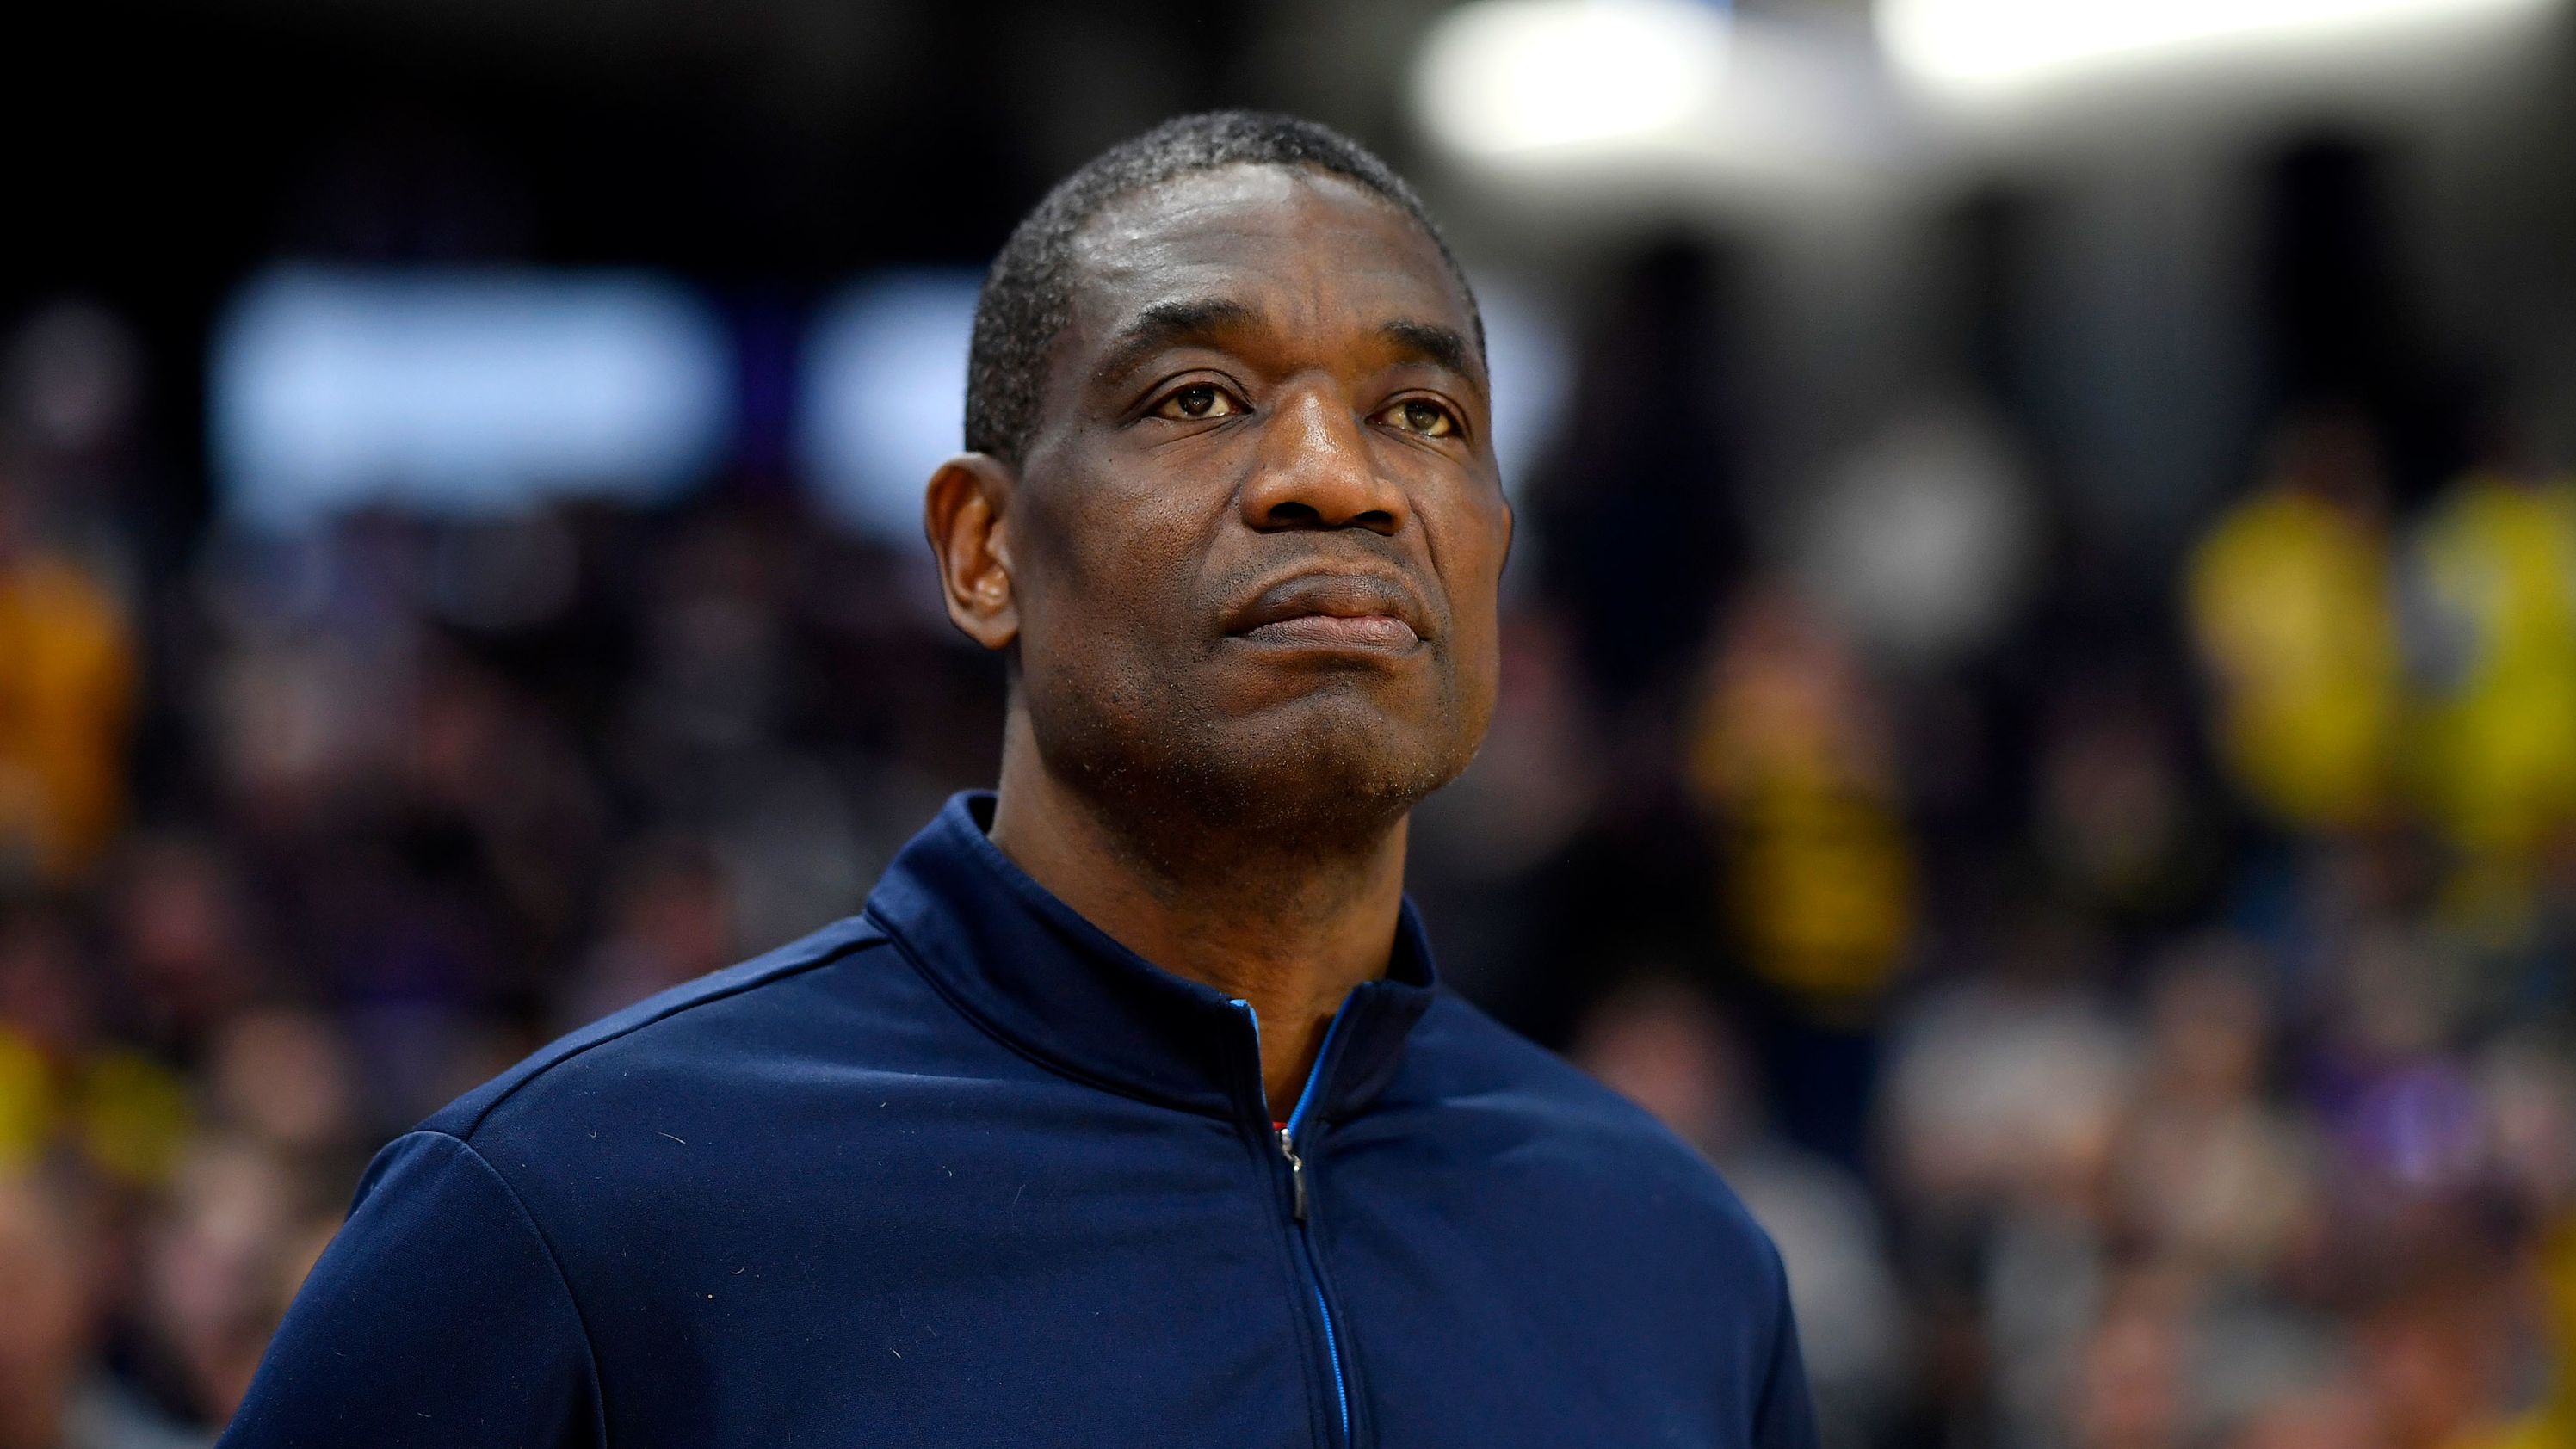 Dikembe Mutombo, seen here in February 2020, is known for his humanitarian work and as an NBA great.